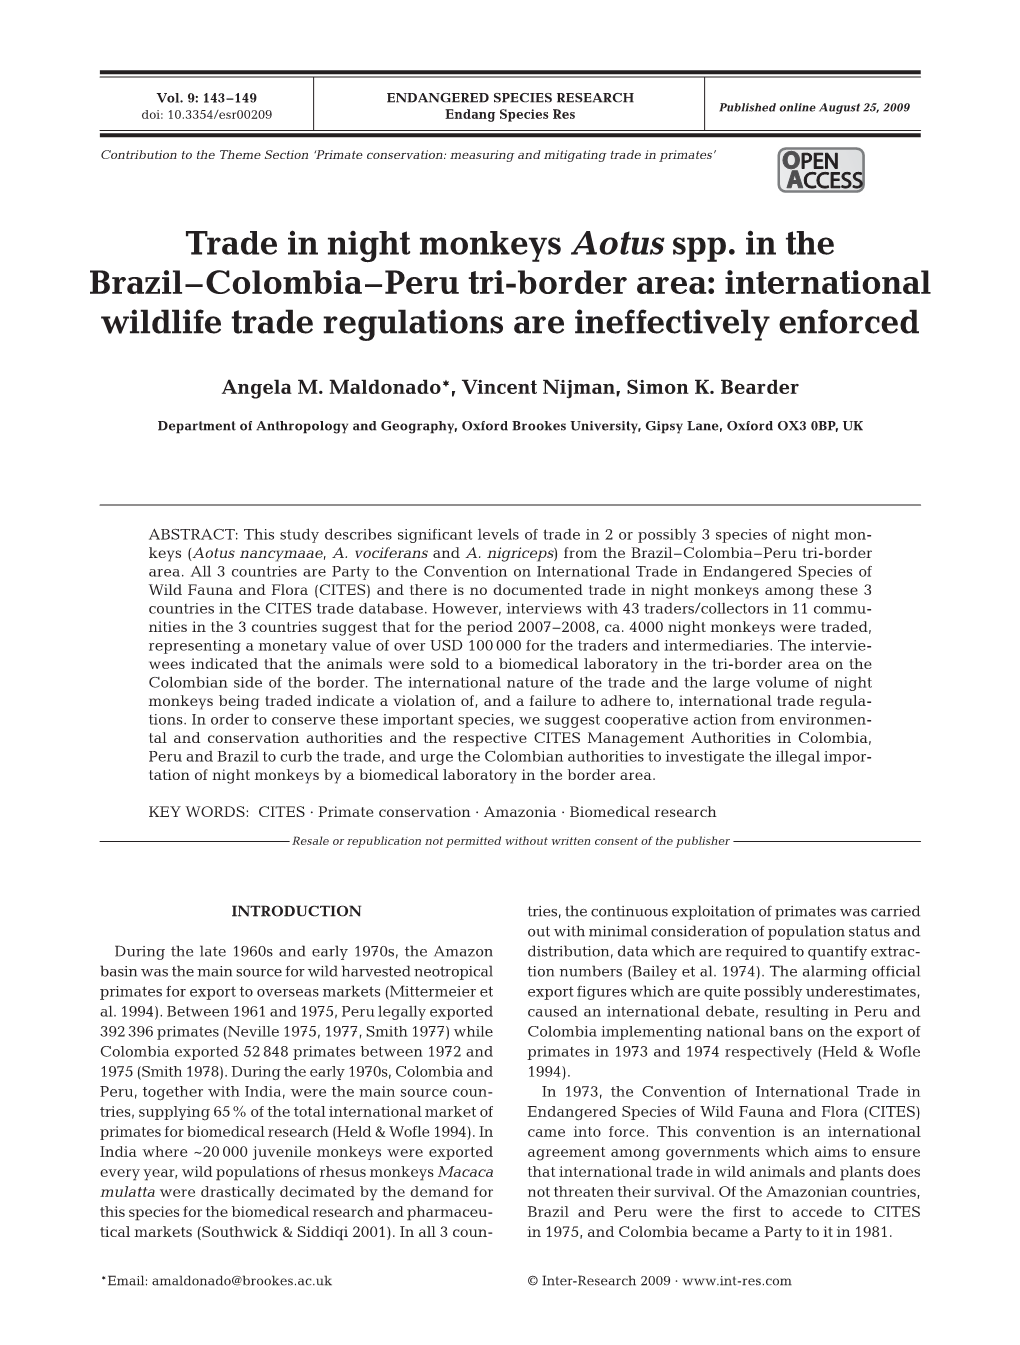 Trade in Night Monkeys Aotus Spp. in the Brazil–Colombia–Peru Tri-Border Area: International Wildlife Trade Regulations Are Ineffectively Enforced